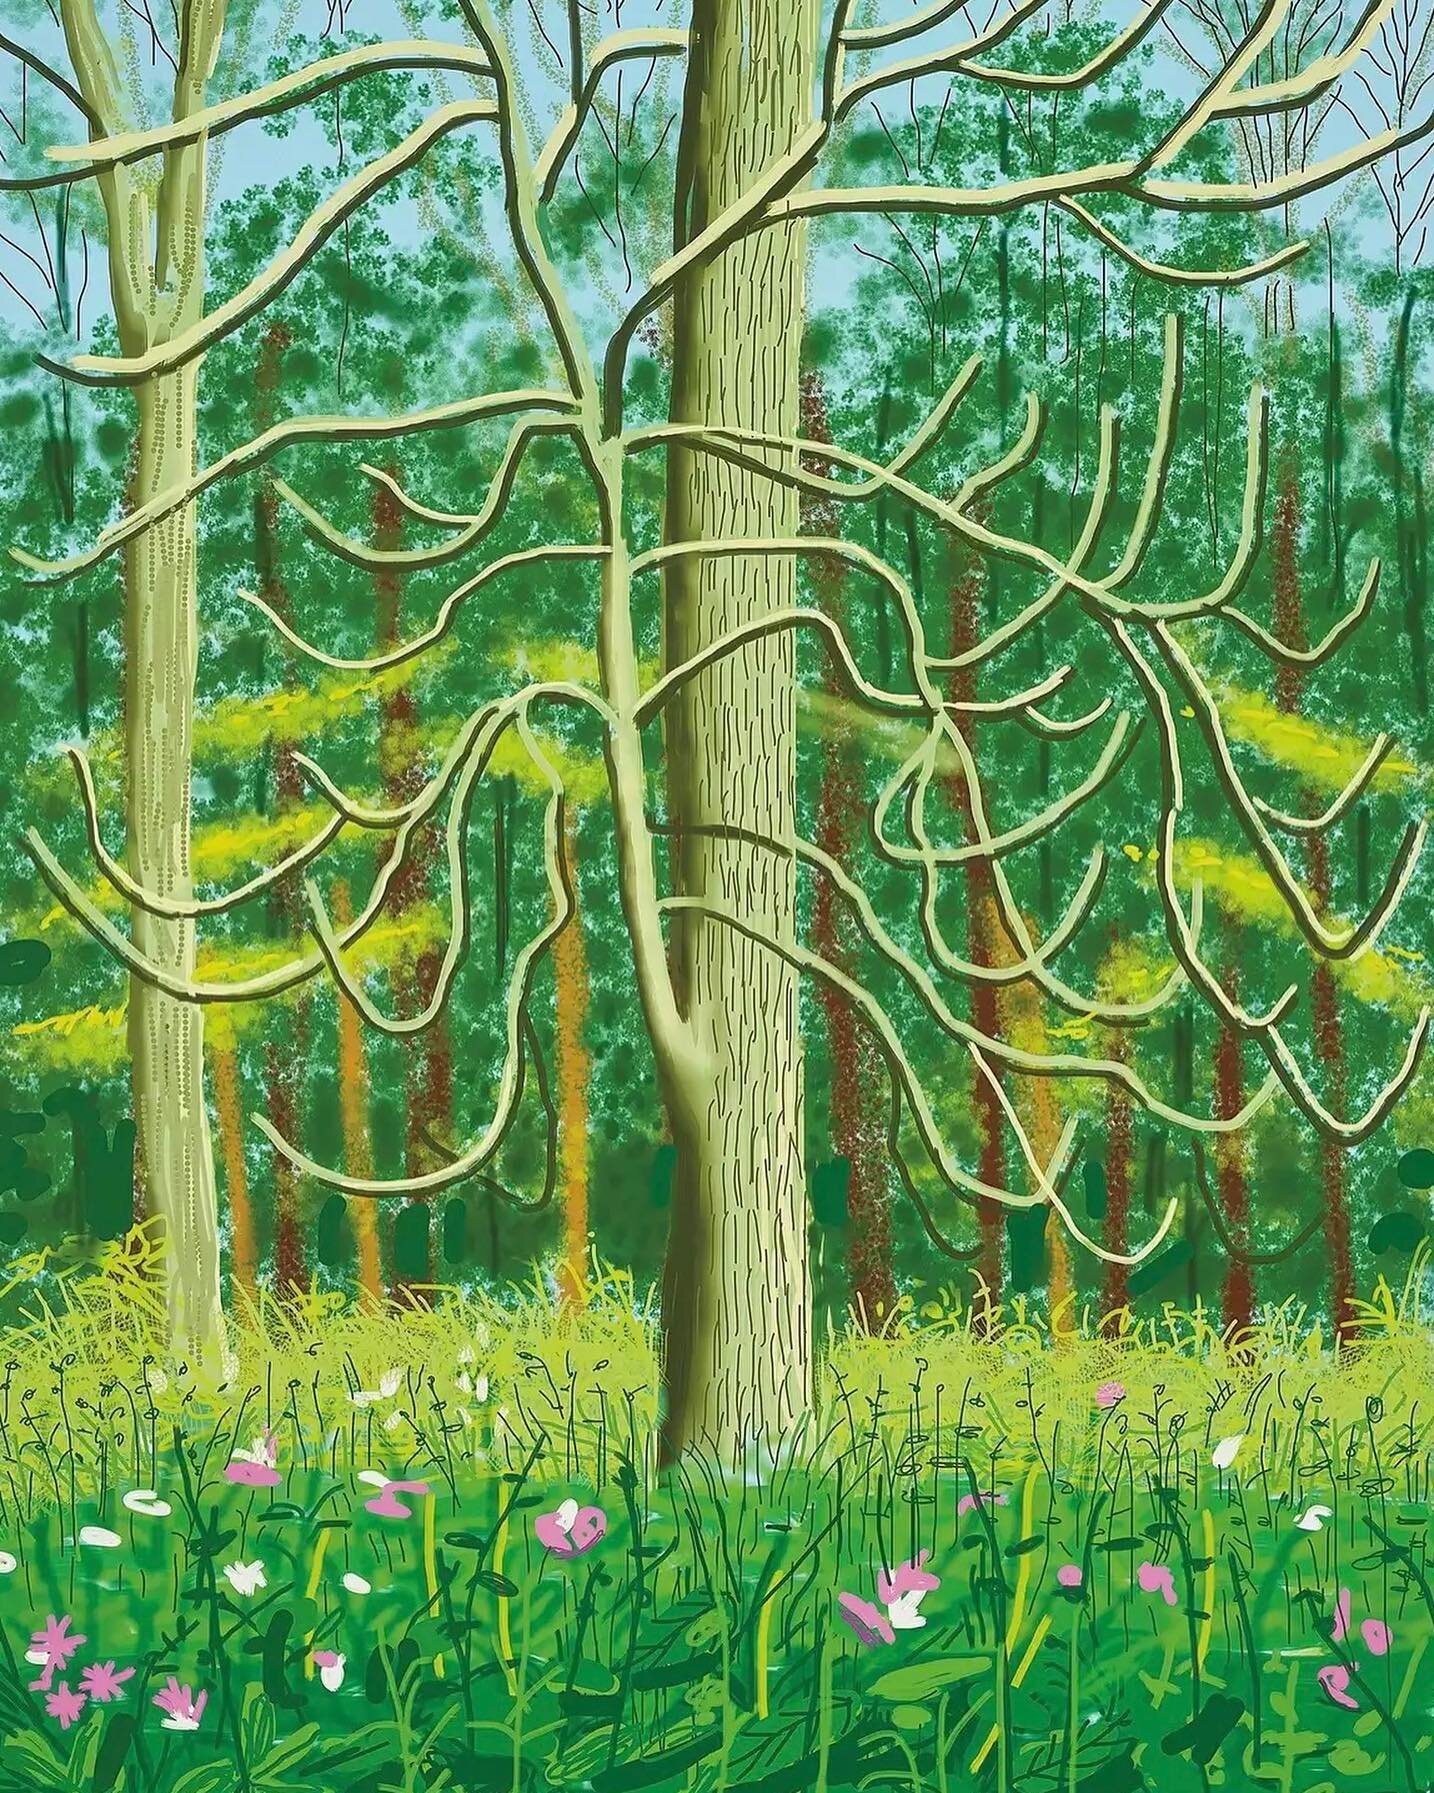 &quot;The Arrival of Spring in Woldgate, East Yorkshire 4 May, 2011&quot;, iPad drawing by David Hockney (via @Artsy.) David Hockney is known for being one of the early adapters of the iPad in his painting practice. His innovative and curious spirit 